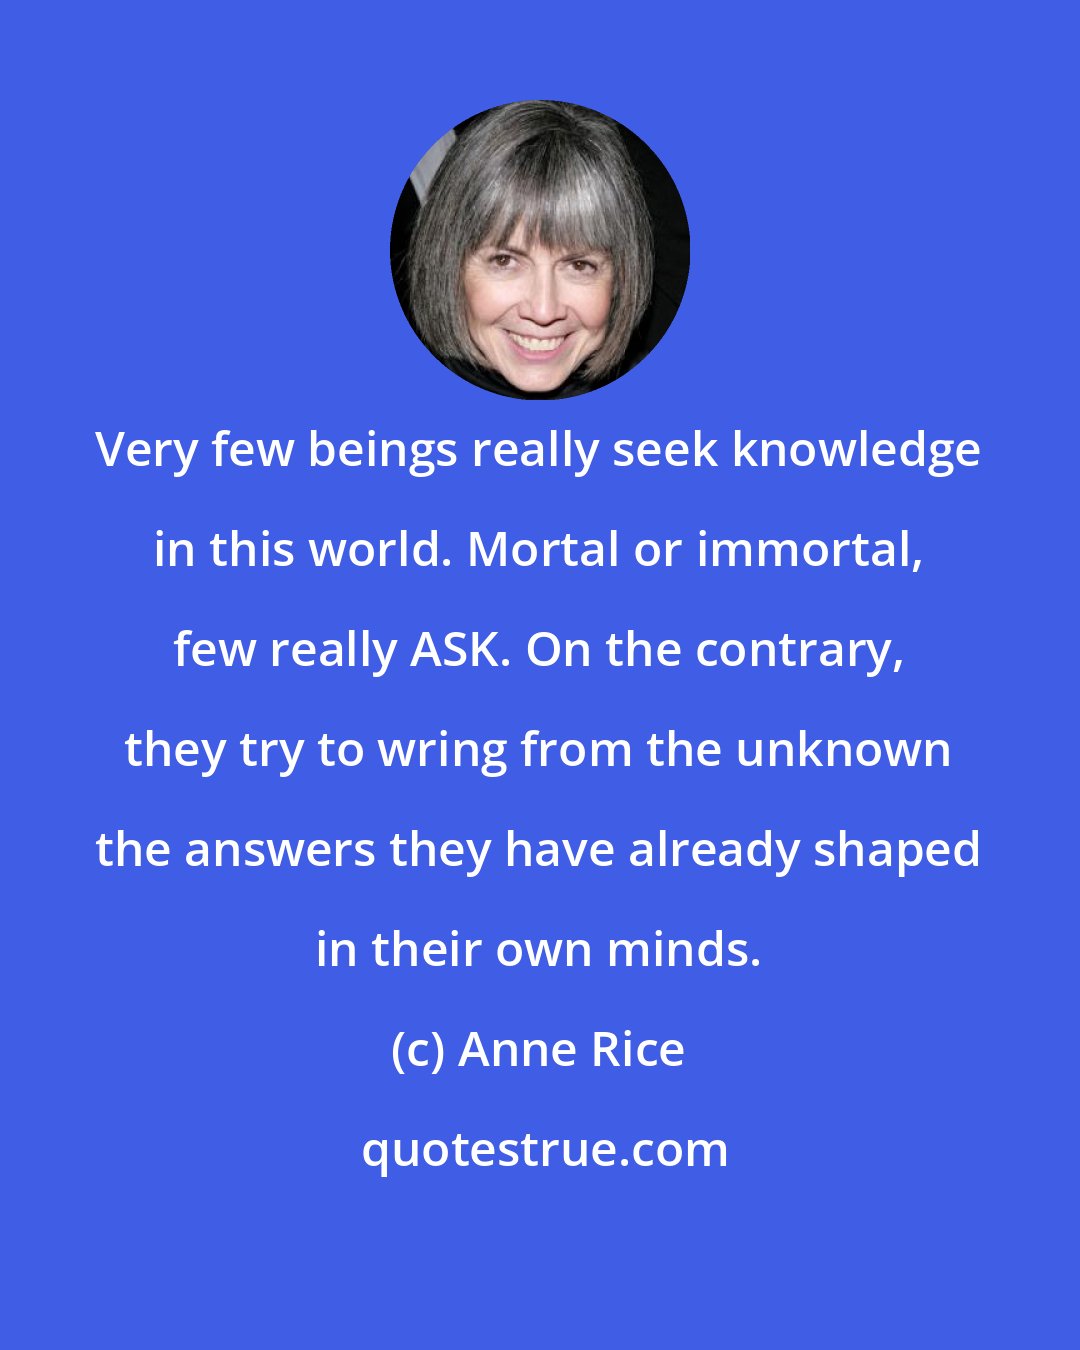 Anne Rice: Very few beings really seek knowledge in this world. Mortal or immortal, few really ASK. On the contrary, they try to wring from the unknown the answers they have already shaped in their own minds.